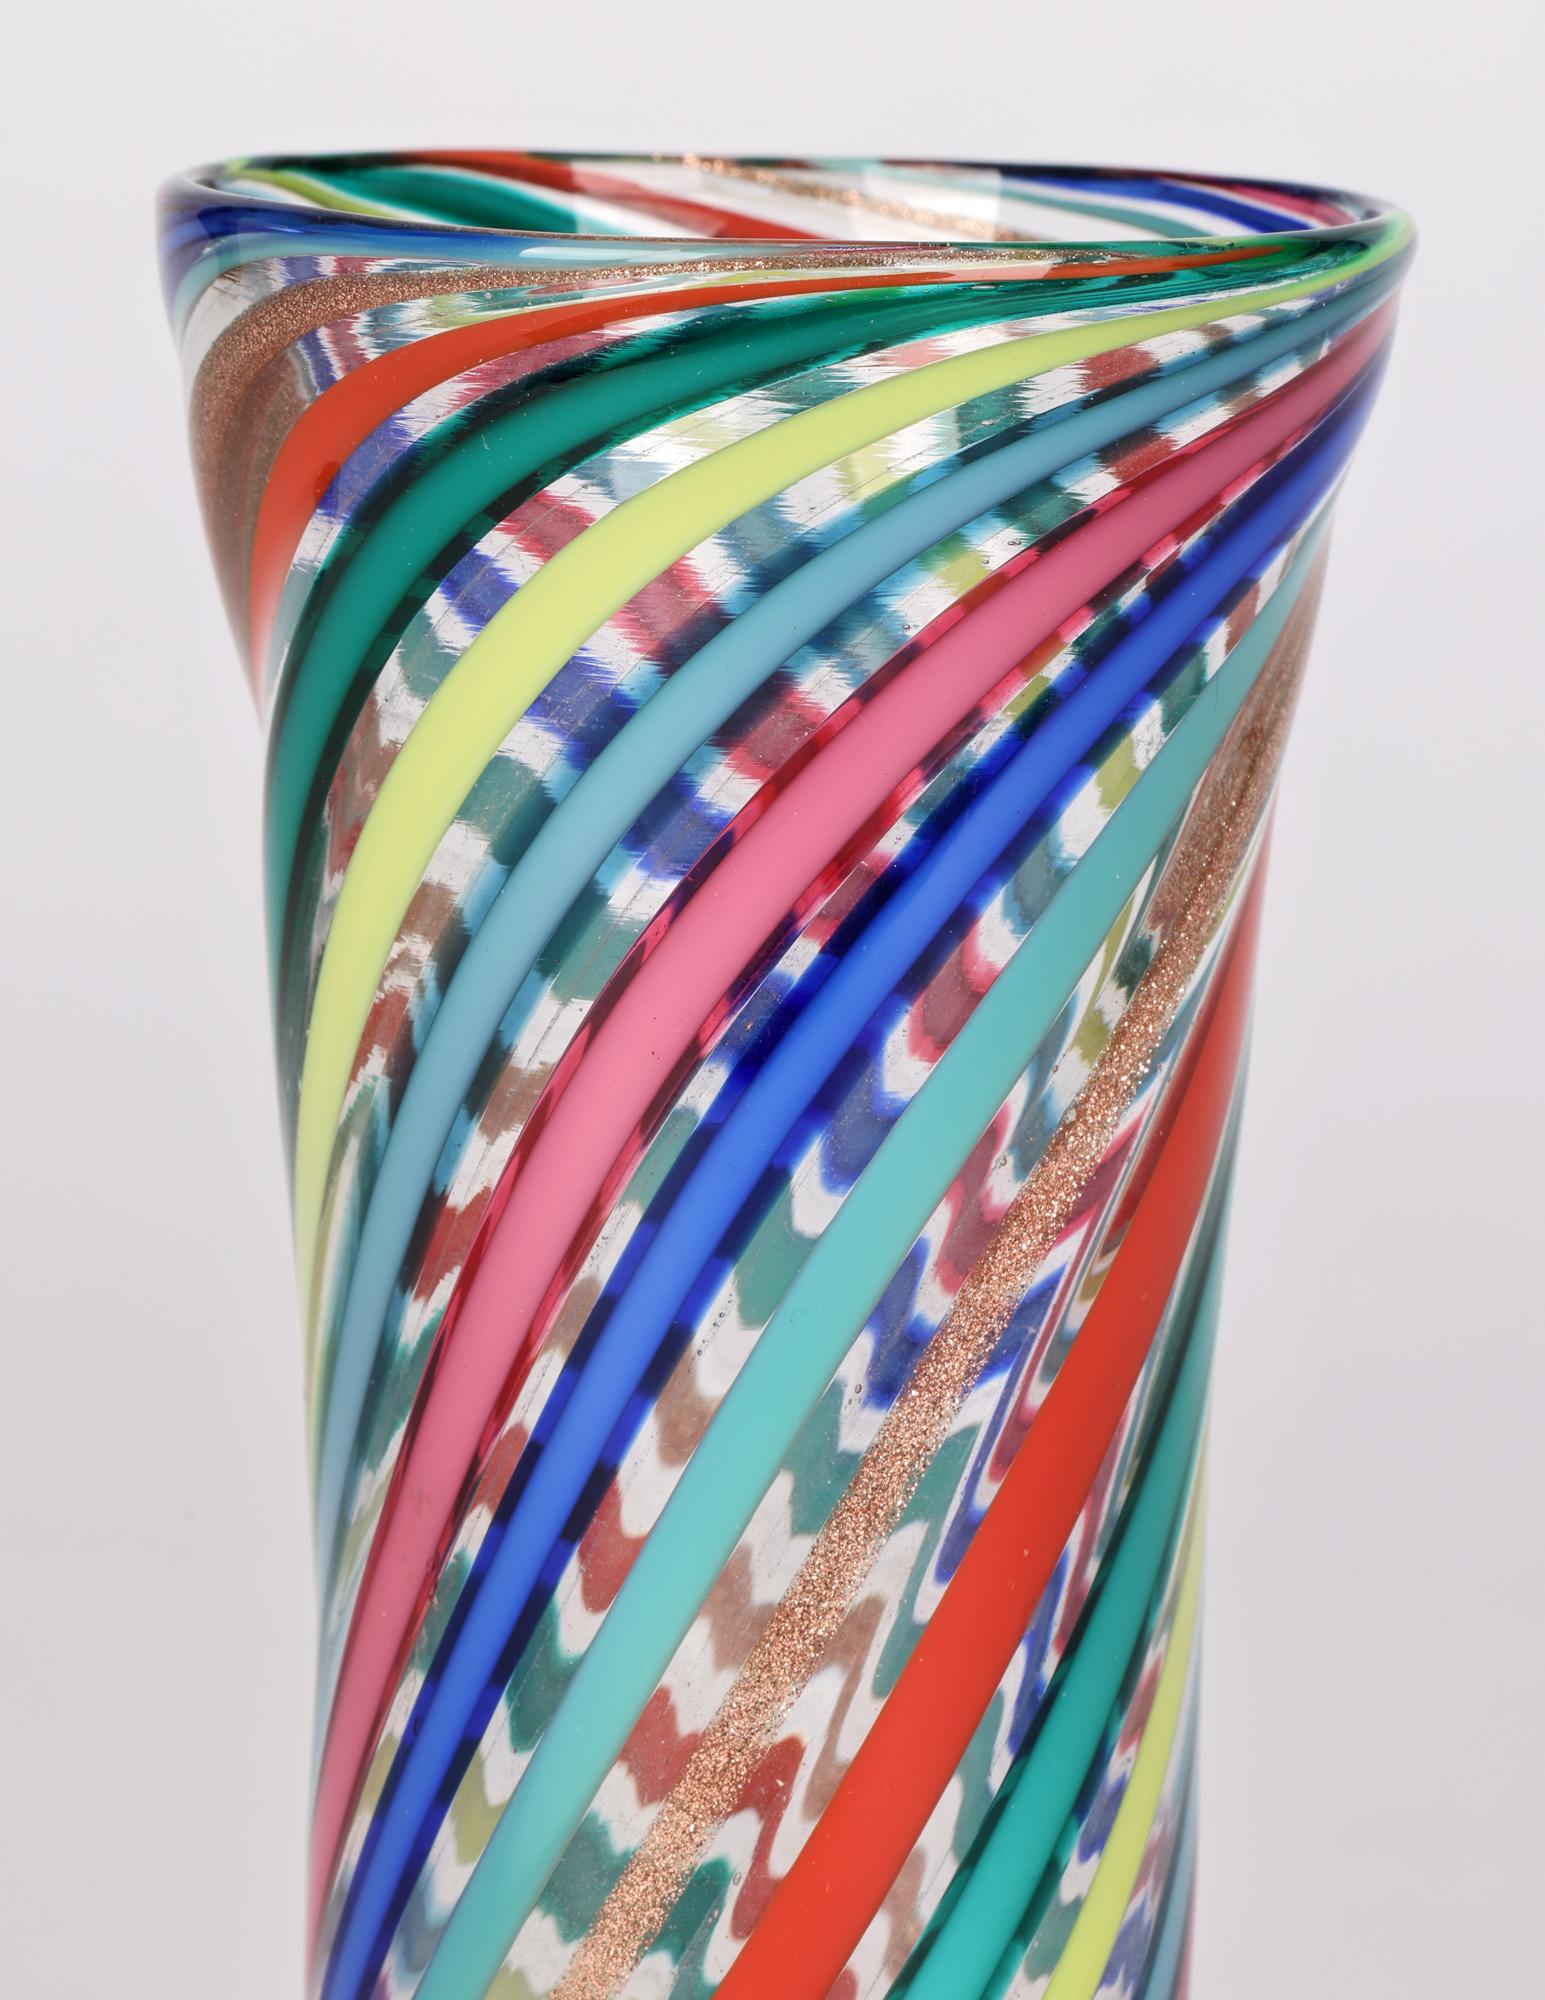 A very fine Murano, possibly Venini, A Canne tall slender glass vase with trailing colored ribbons attributed to Gio Ponti (Italian, 1891-1979) dating from around 1955. This stylish vase stands on a narrow rounded foot with gold aventurine